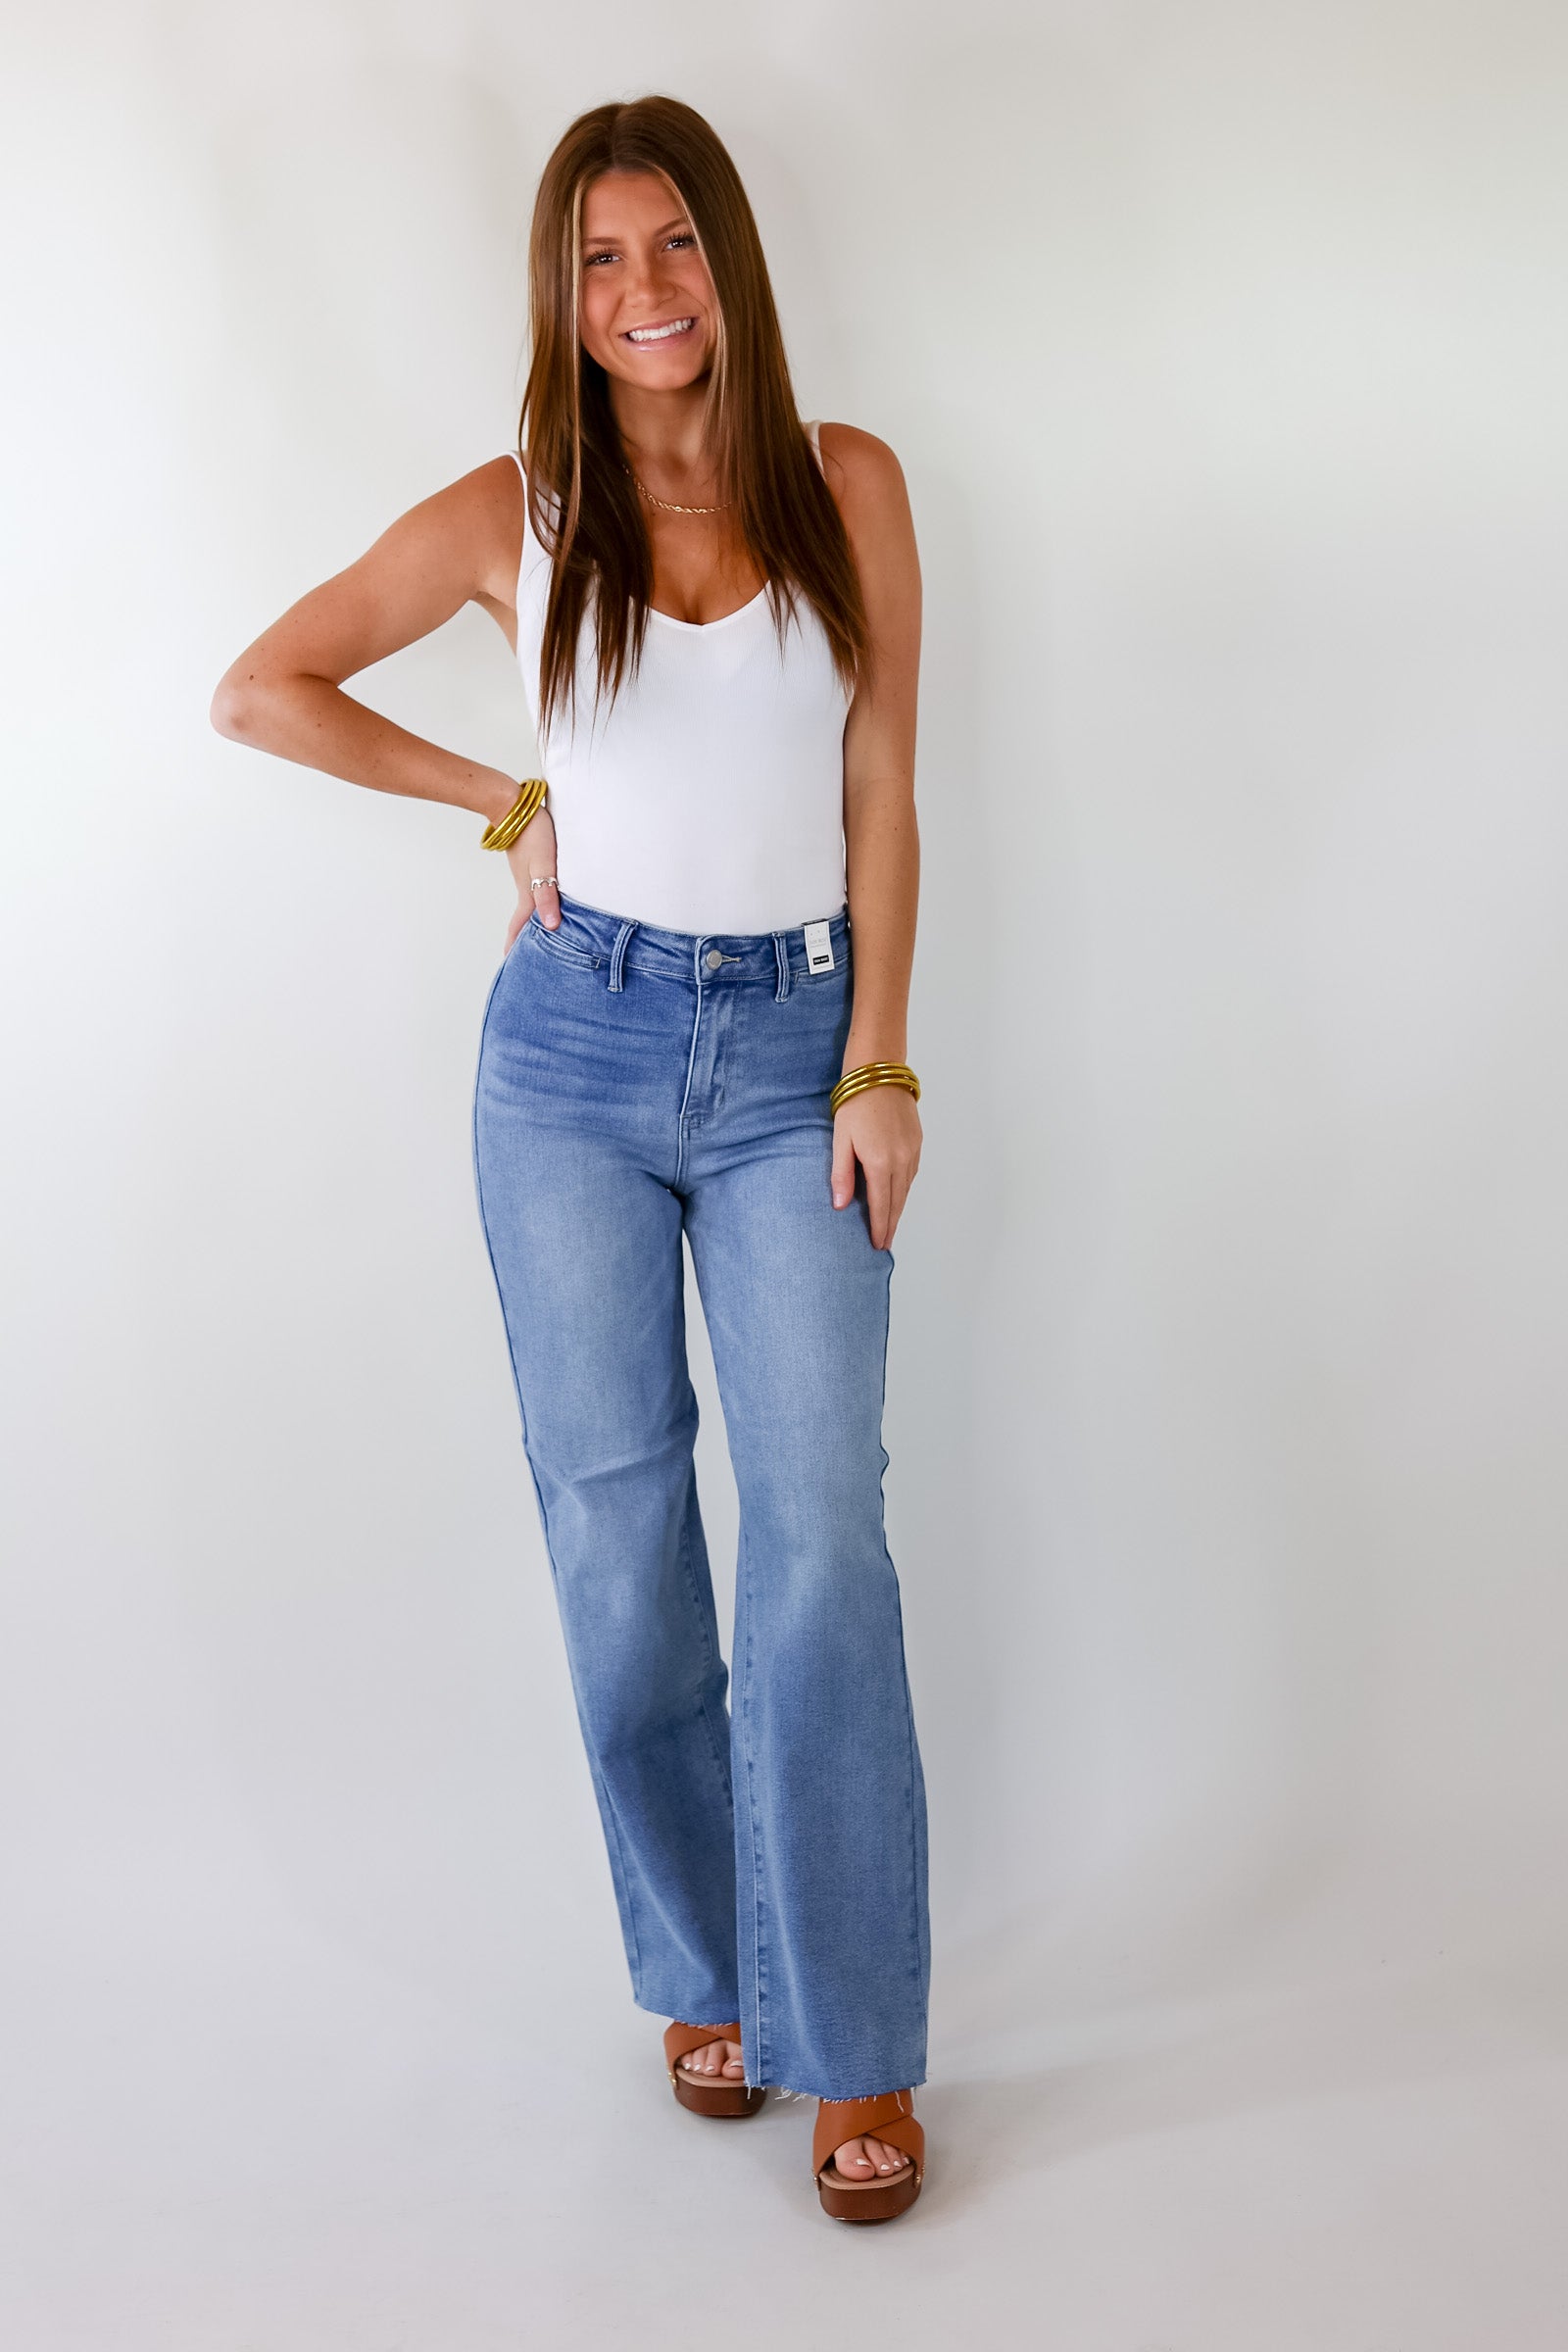 Judy Blue Sea Glass Topaz Tummy Control Flare Jeans - Boujee Boutique